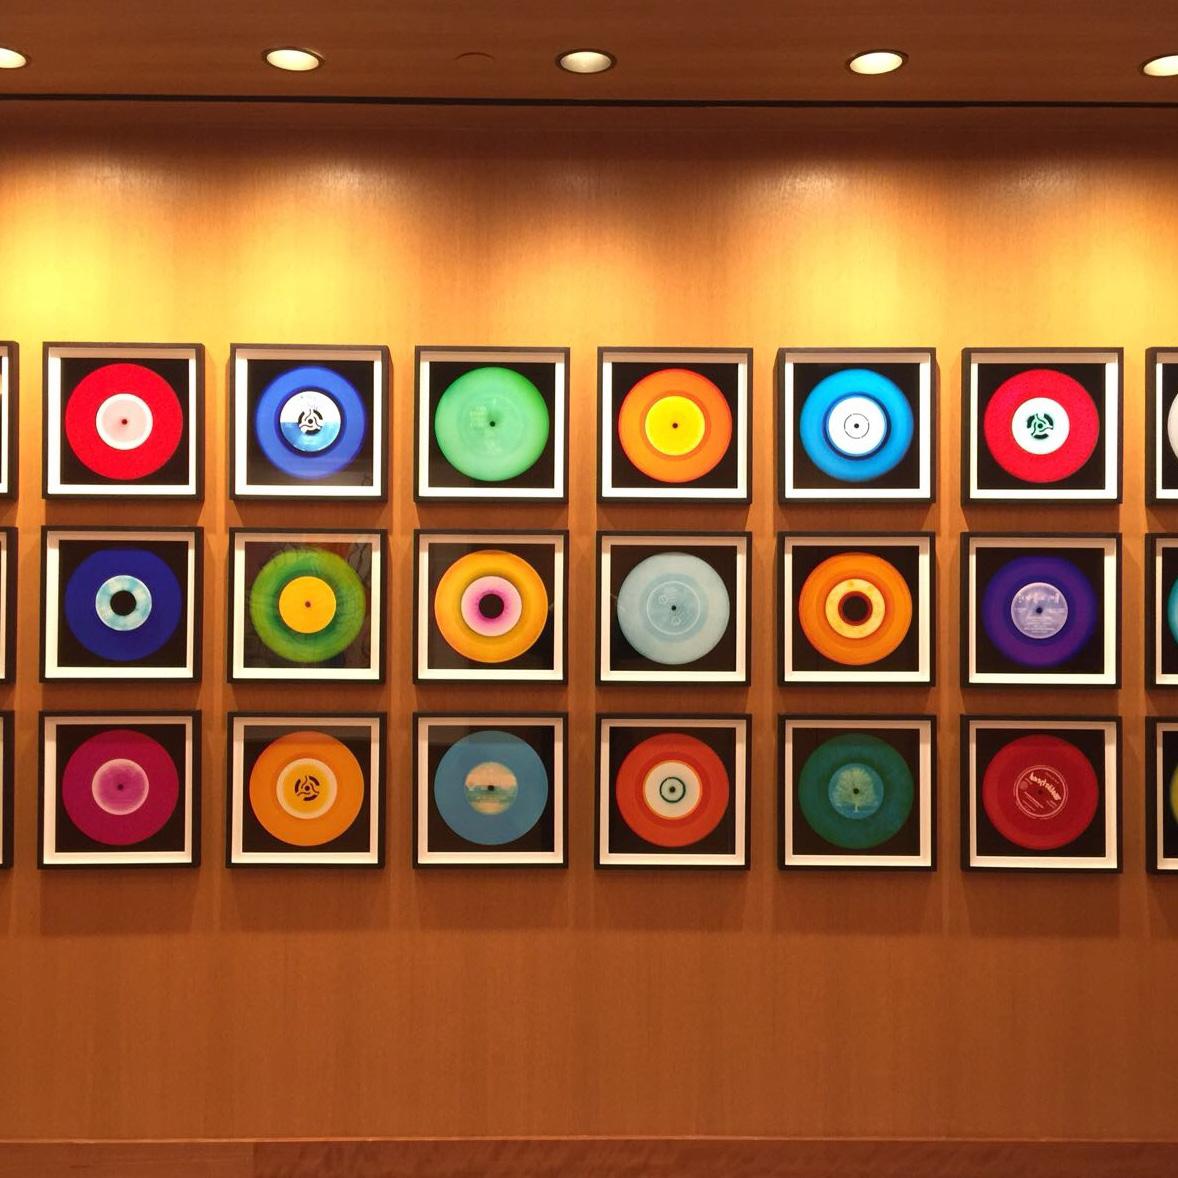 Heidler & Heeps Vinyl Collection Twenty-One Piece Multi-Color Installation.
Acclaimed contemporary photographers, Richard Heeps and Natasha Heidler have collaborated to make this beautifully mesmerising collection. A celebration of the vinyl record